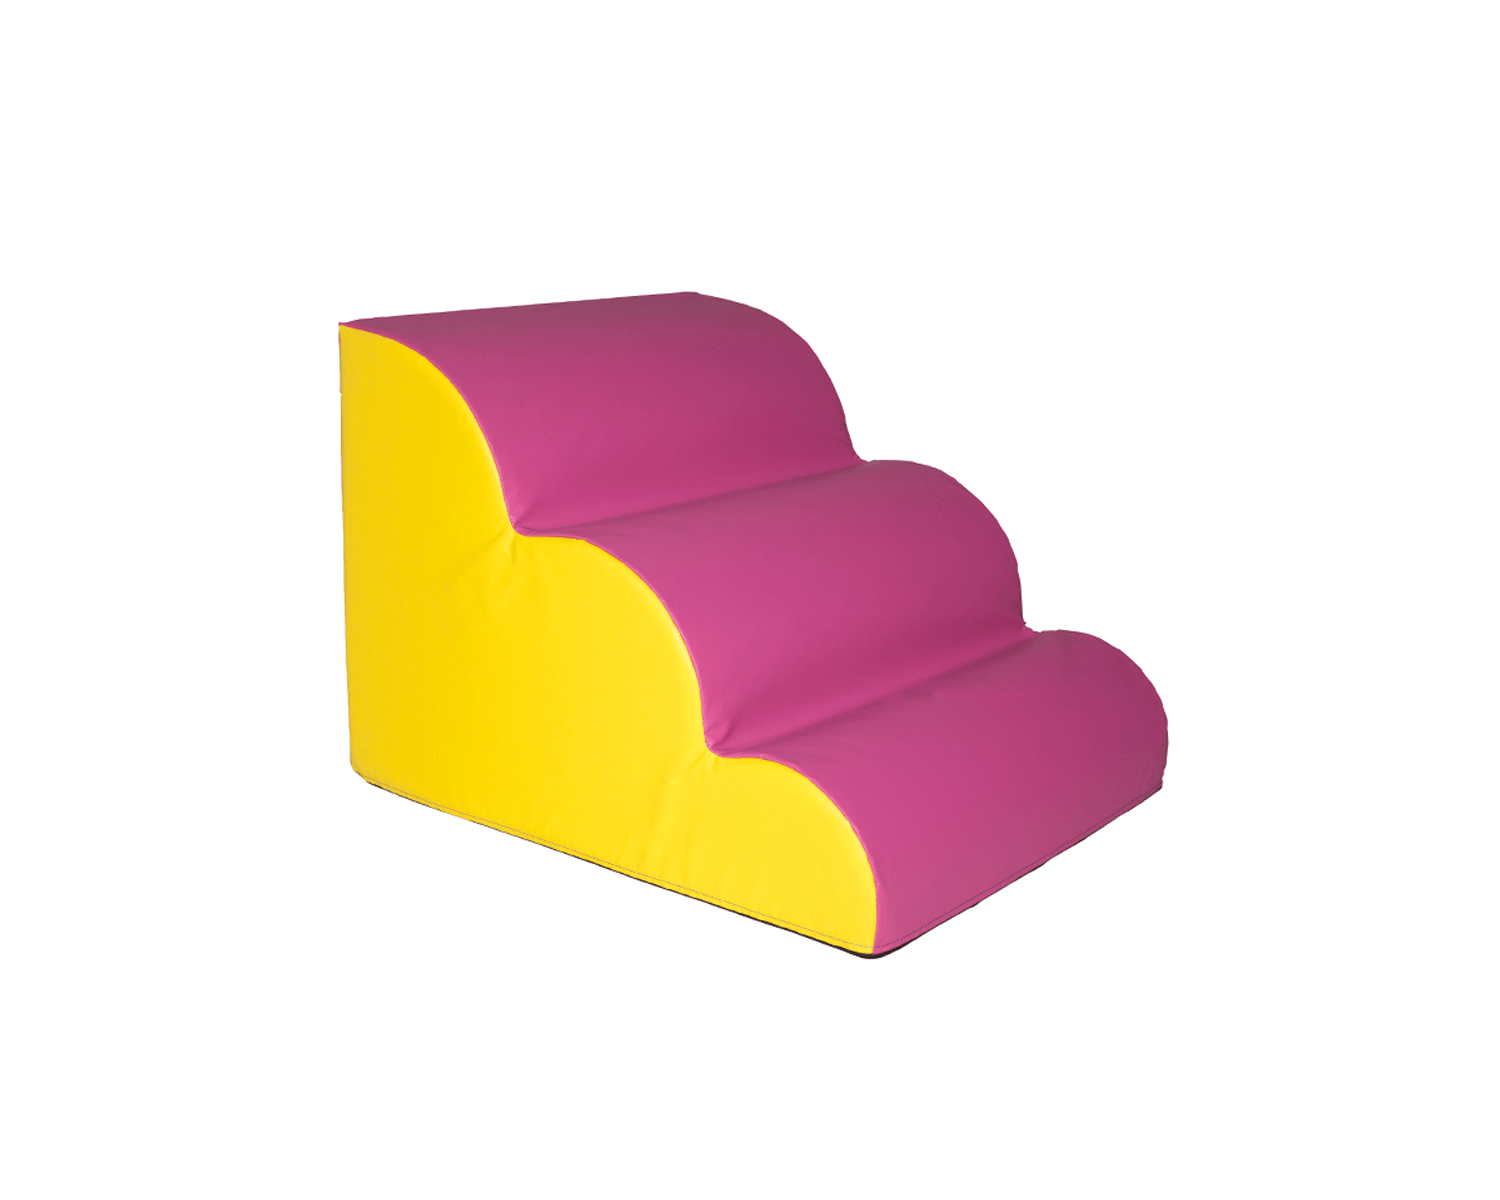 Wobbly Stairs Soft Play Item